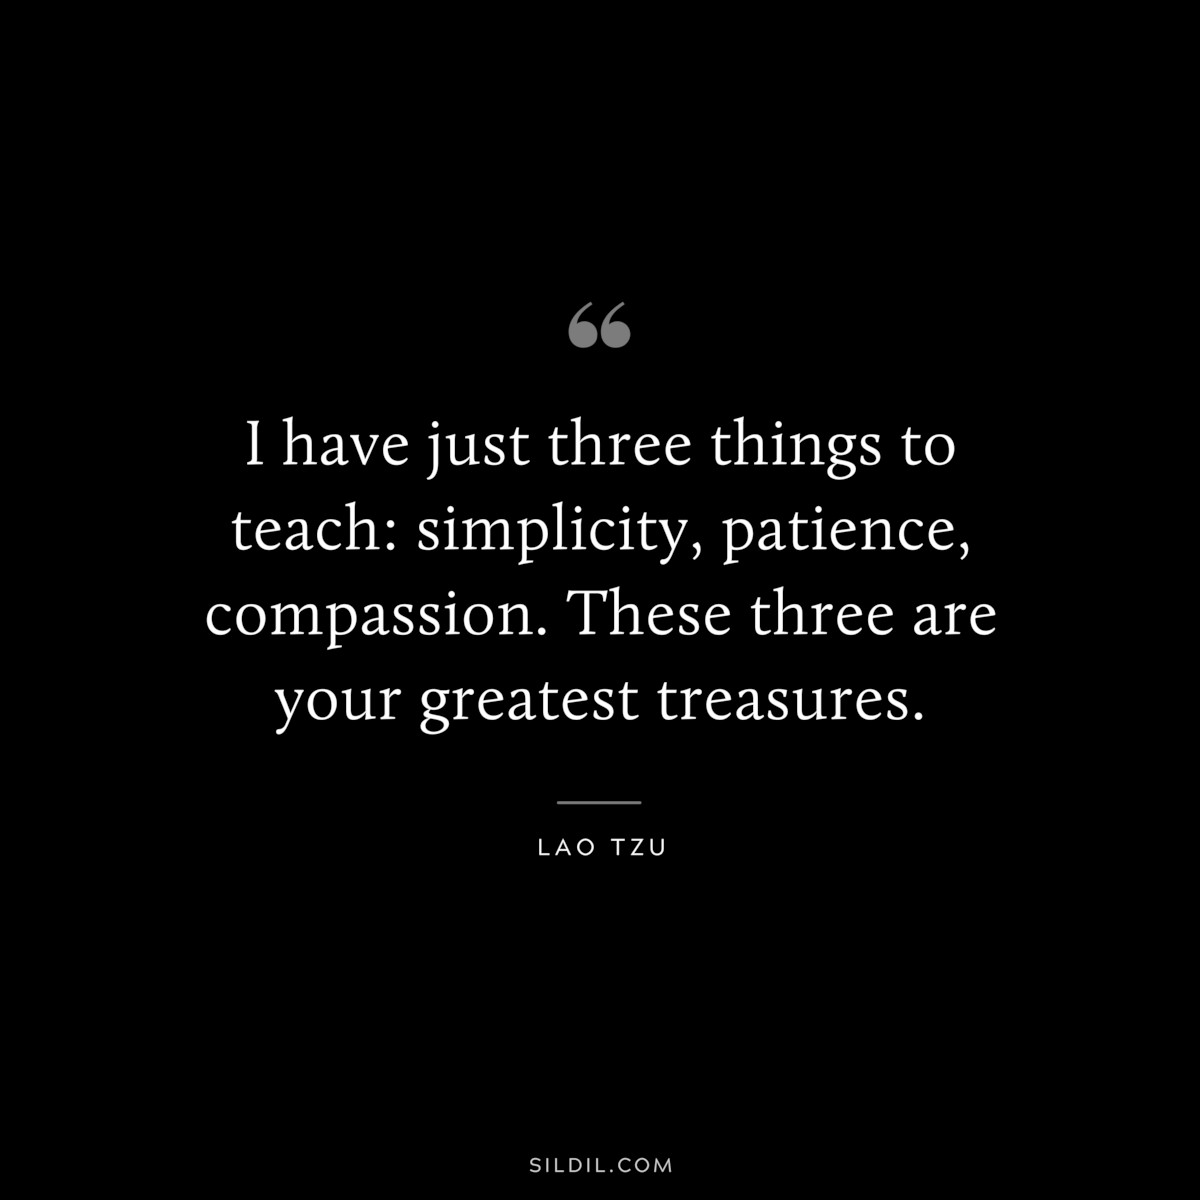 I have just three things to teach: simplicity, patience, compassion. These three are your greatest treasures. ― Lao Tzu